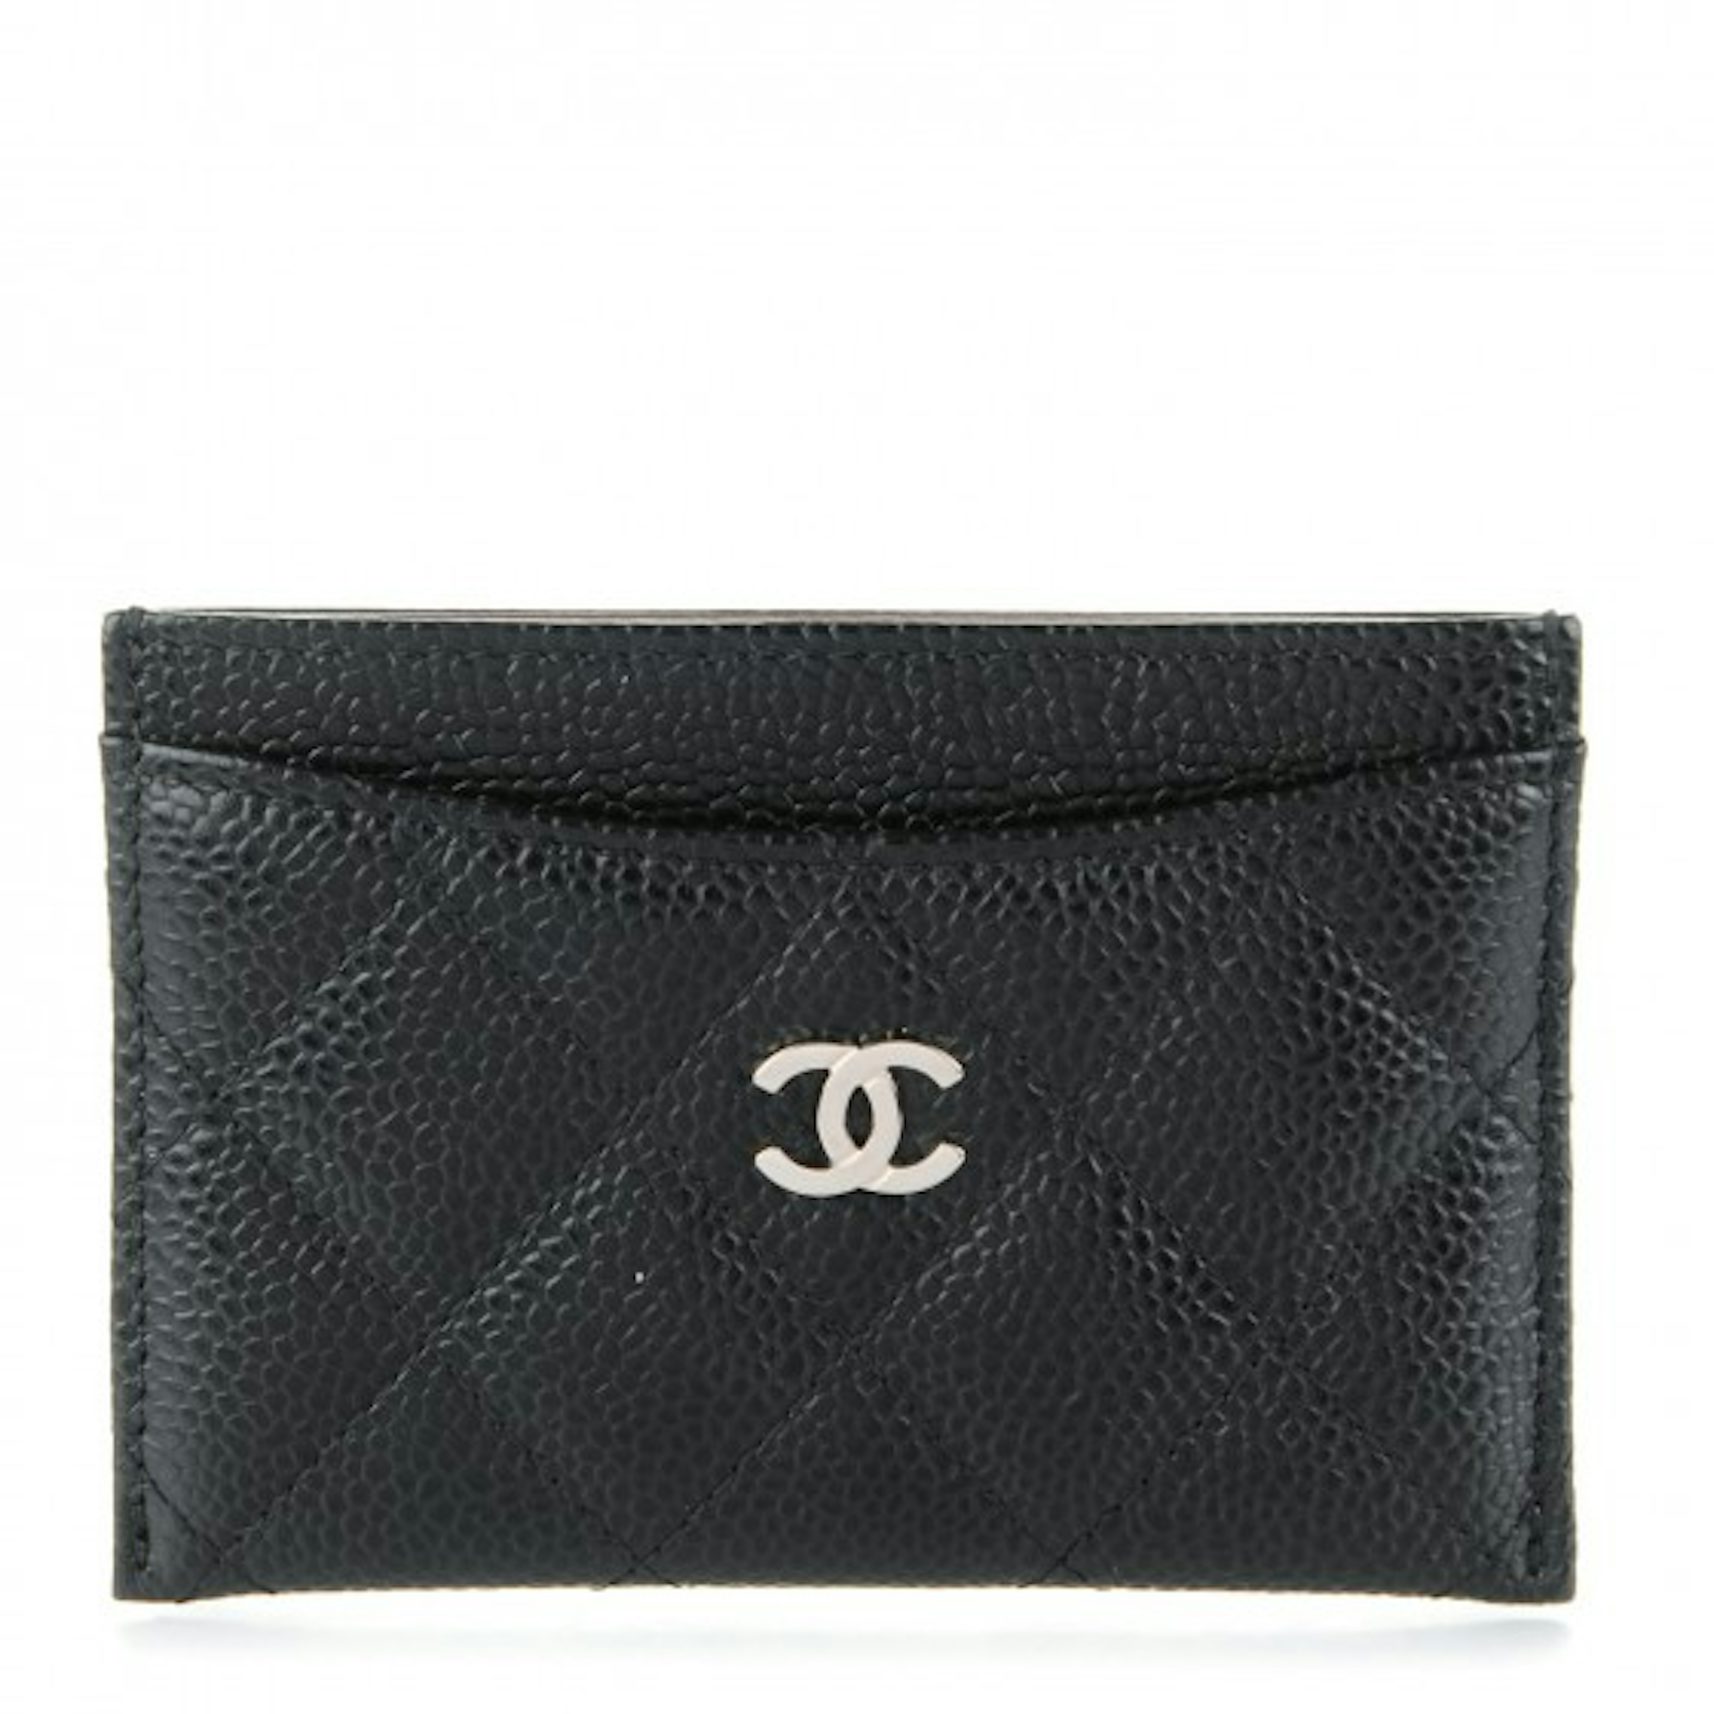  Chanel, Pre-Loved Black Quilted Caviar Card Holder